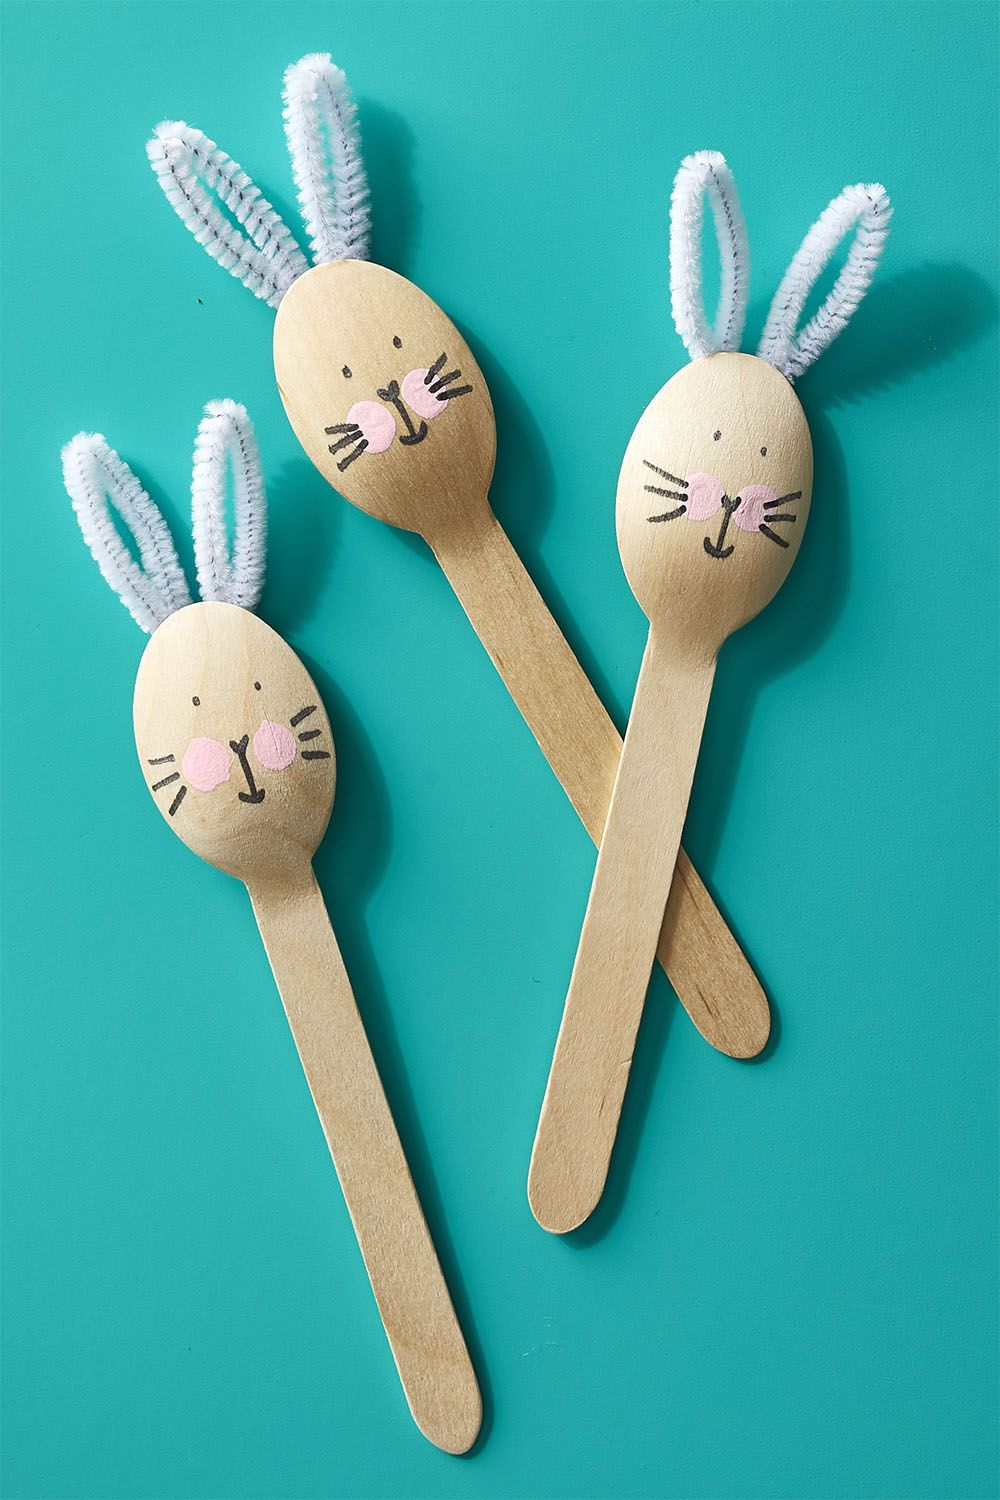 Easy Easter Craft Ideas for Kids You Will Love! 